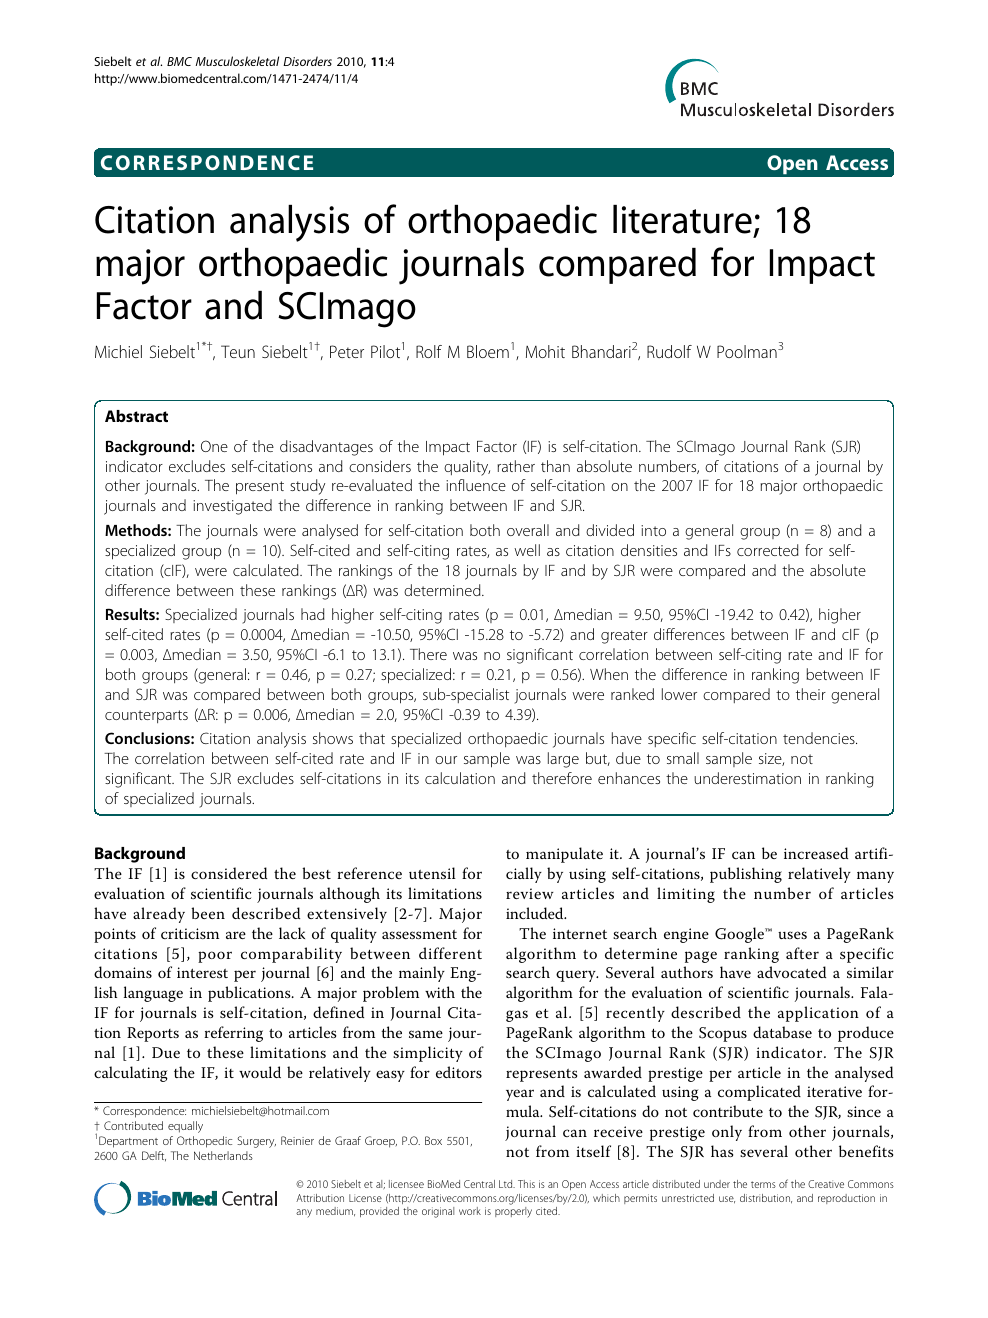 Citation Analysis Of Orthopaedic Literature 18 Major Orthopaedic Journals Compared For Impact Factor And Scimago Topic Of Research Paper In Health Sciences Download Scholarly Article Pdf And Read For Free On